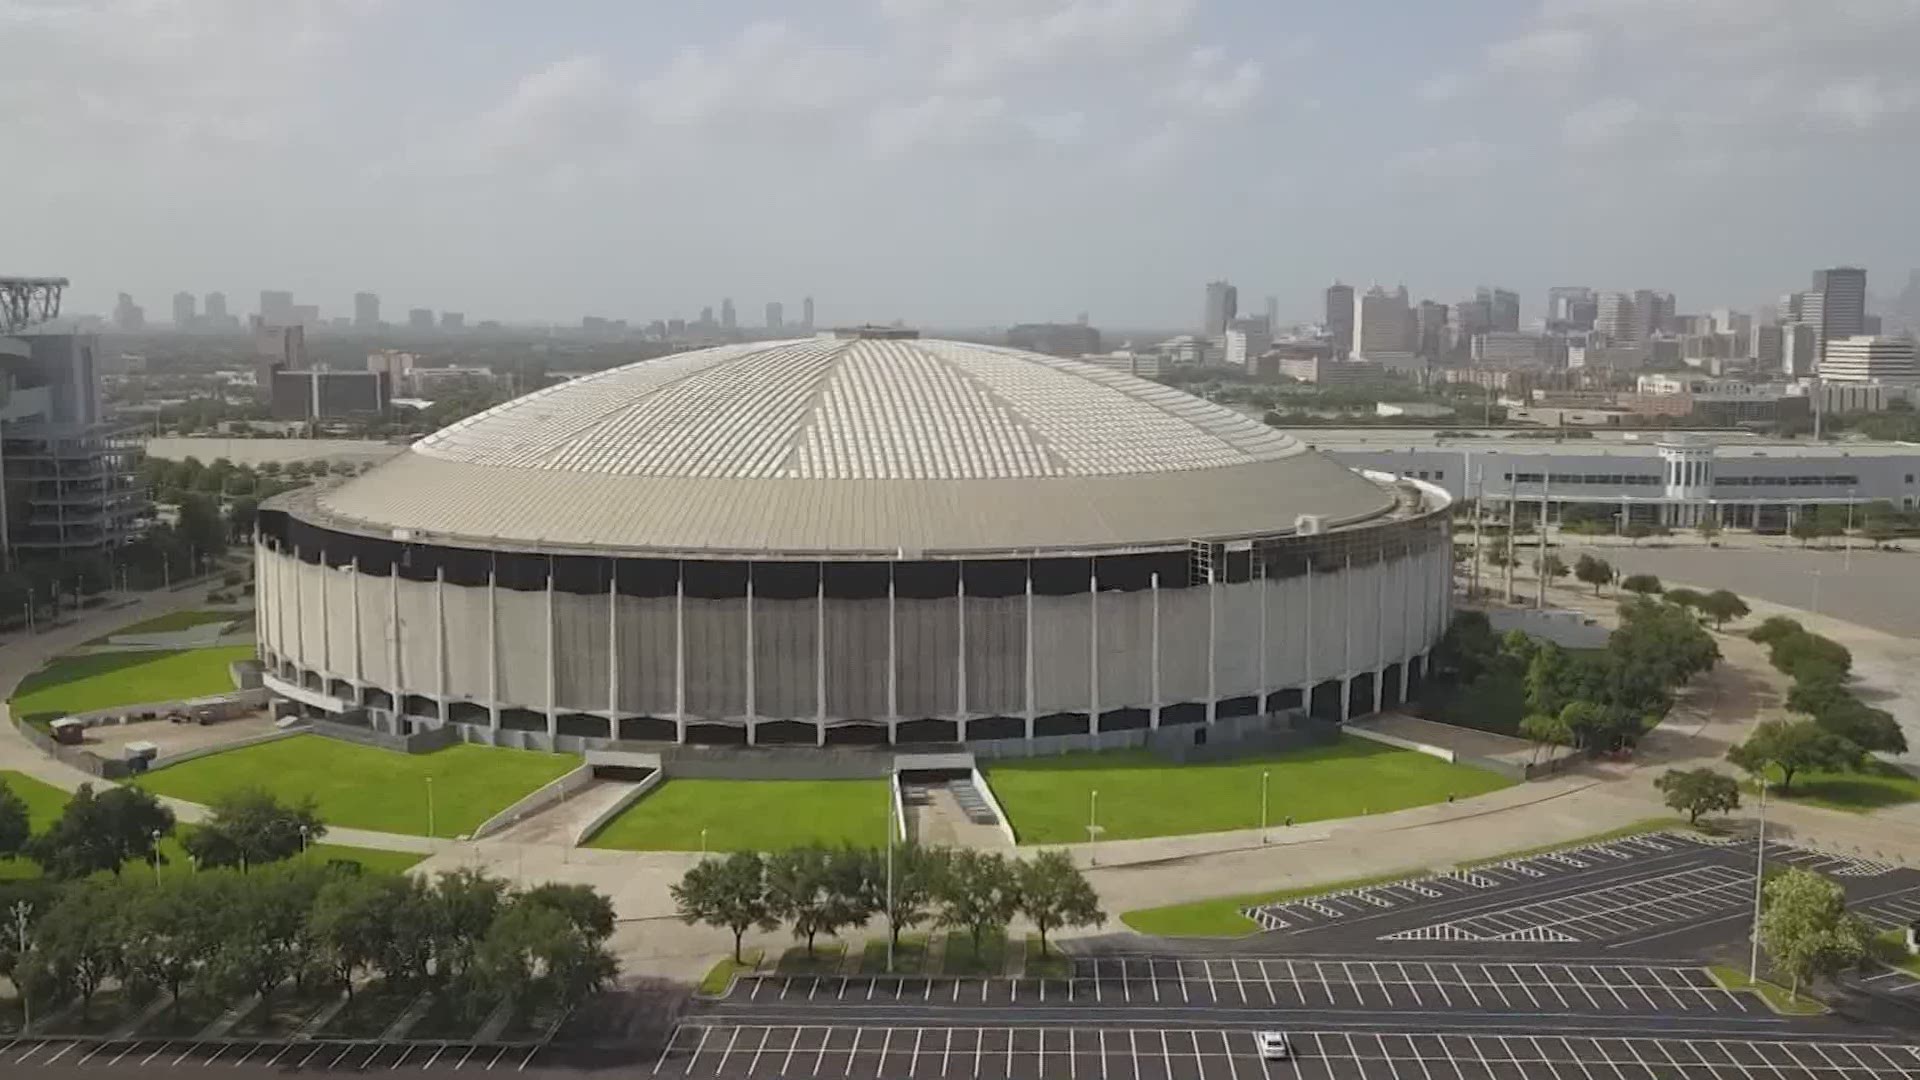 A new campaign launched Monday in yet another effort to give the old Astrodome a new lease on life.